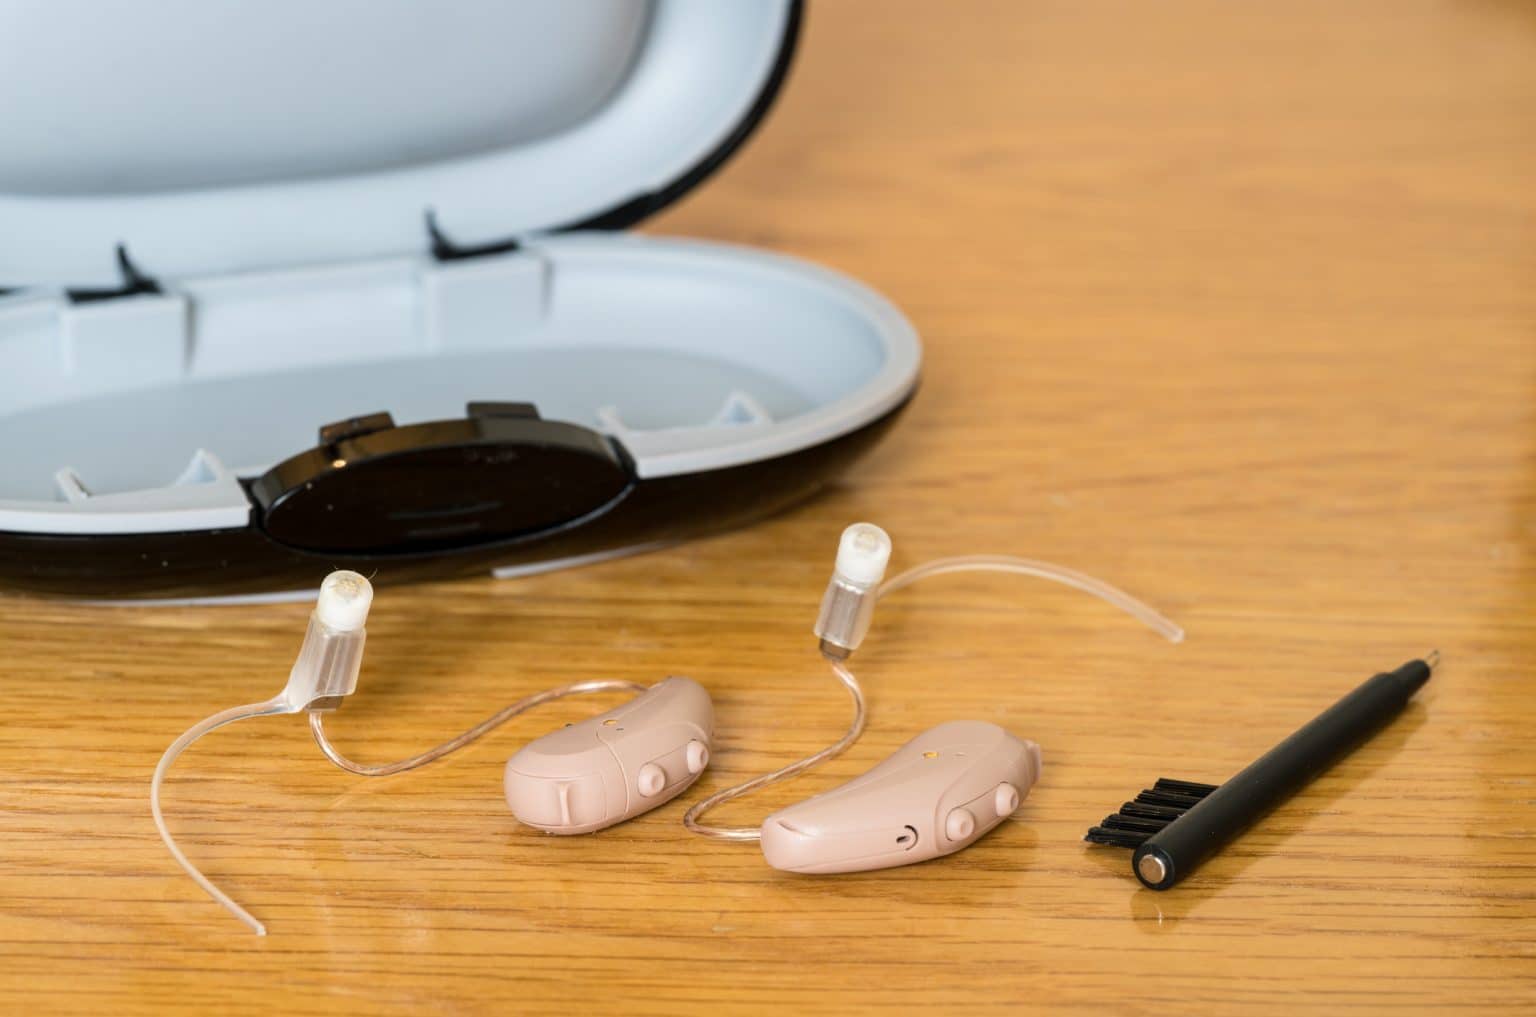 Close up of a pair of hearing aids along with a cleaning brush and case.